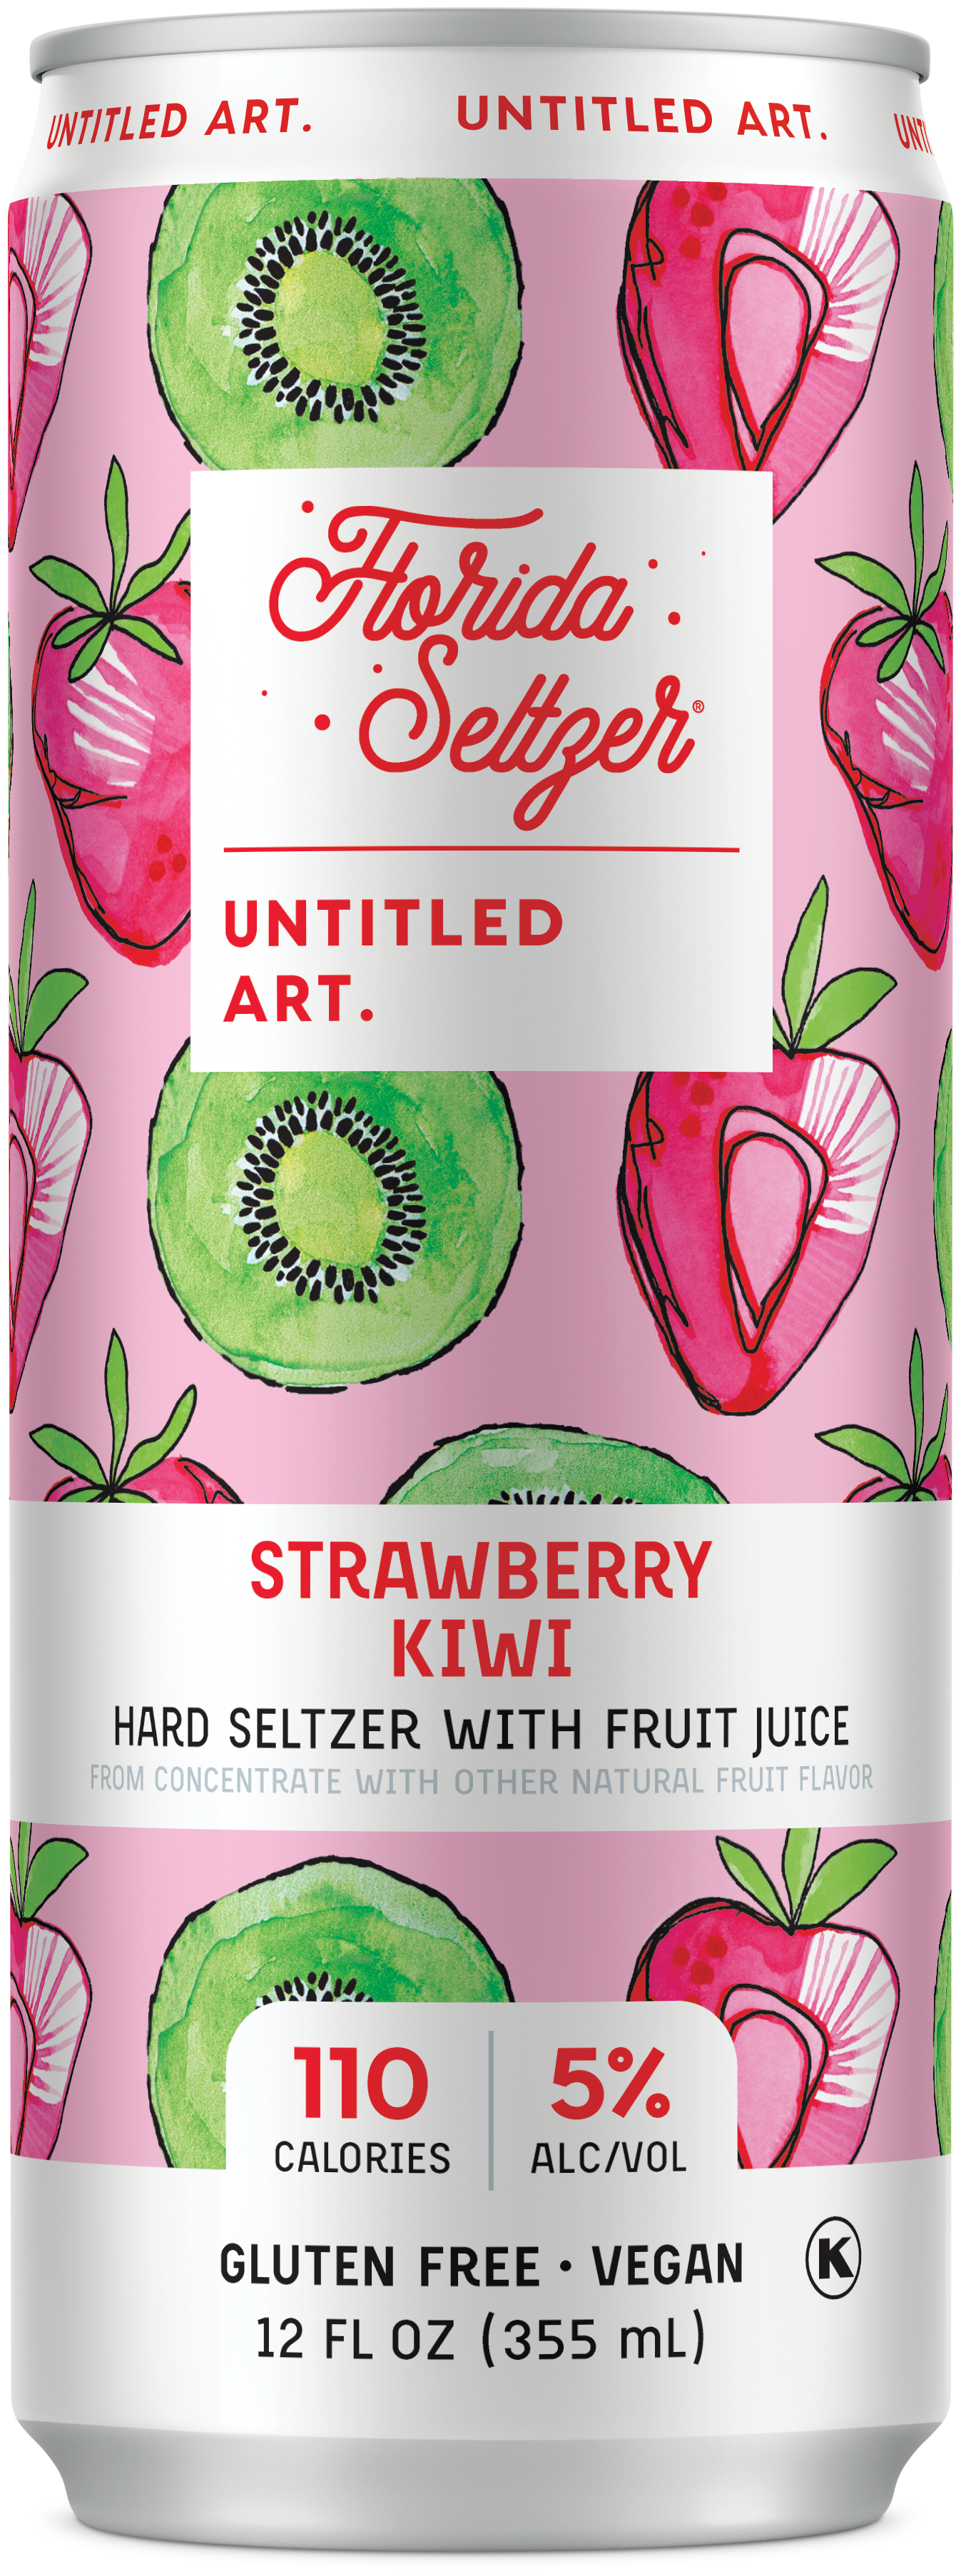 A can of strawberry and kiwi juice.